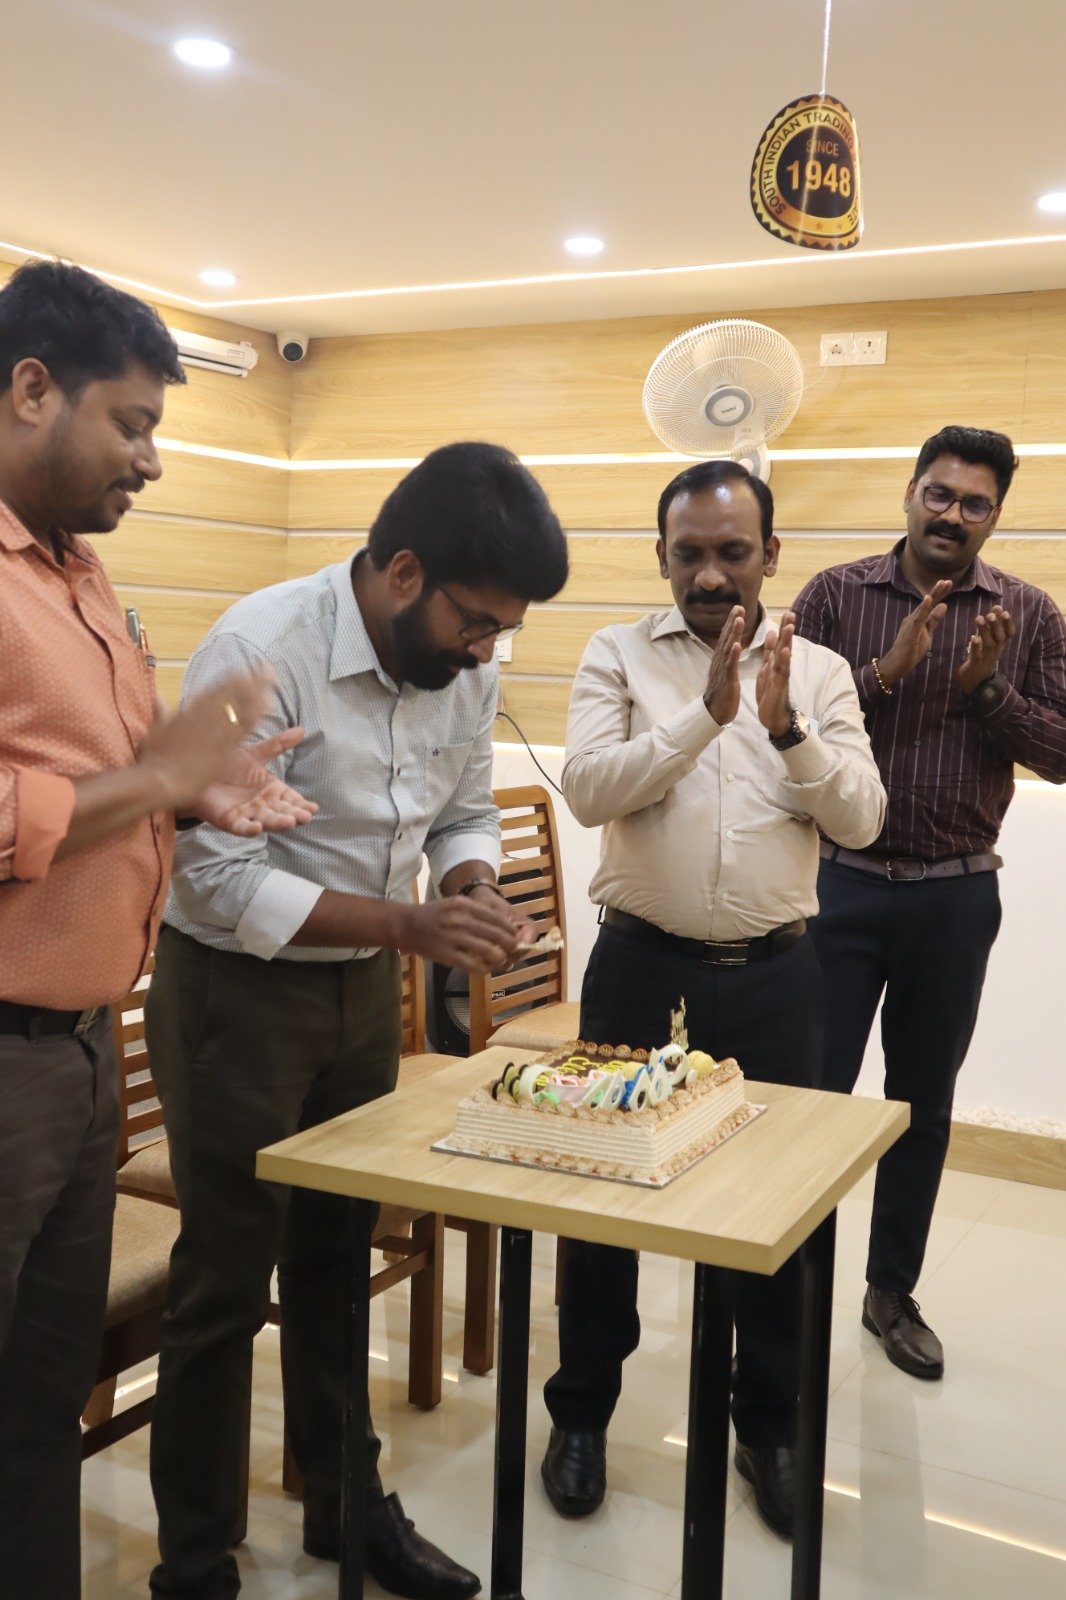 Birthday celebration of our ceo